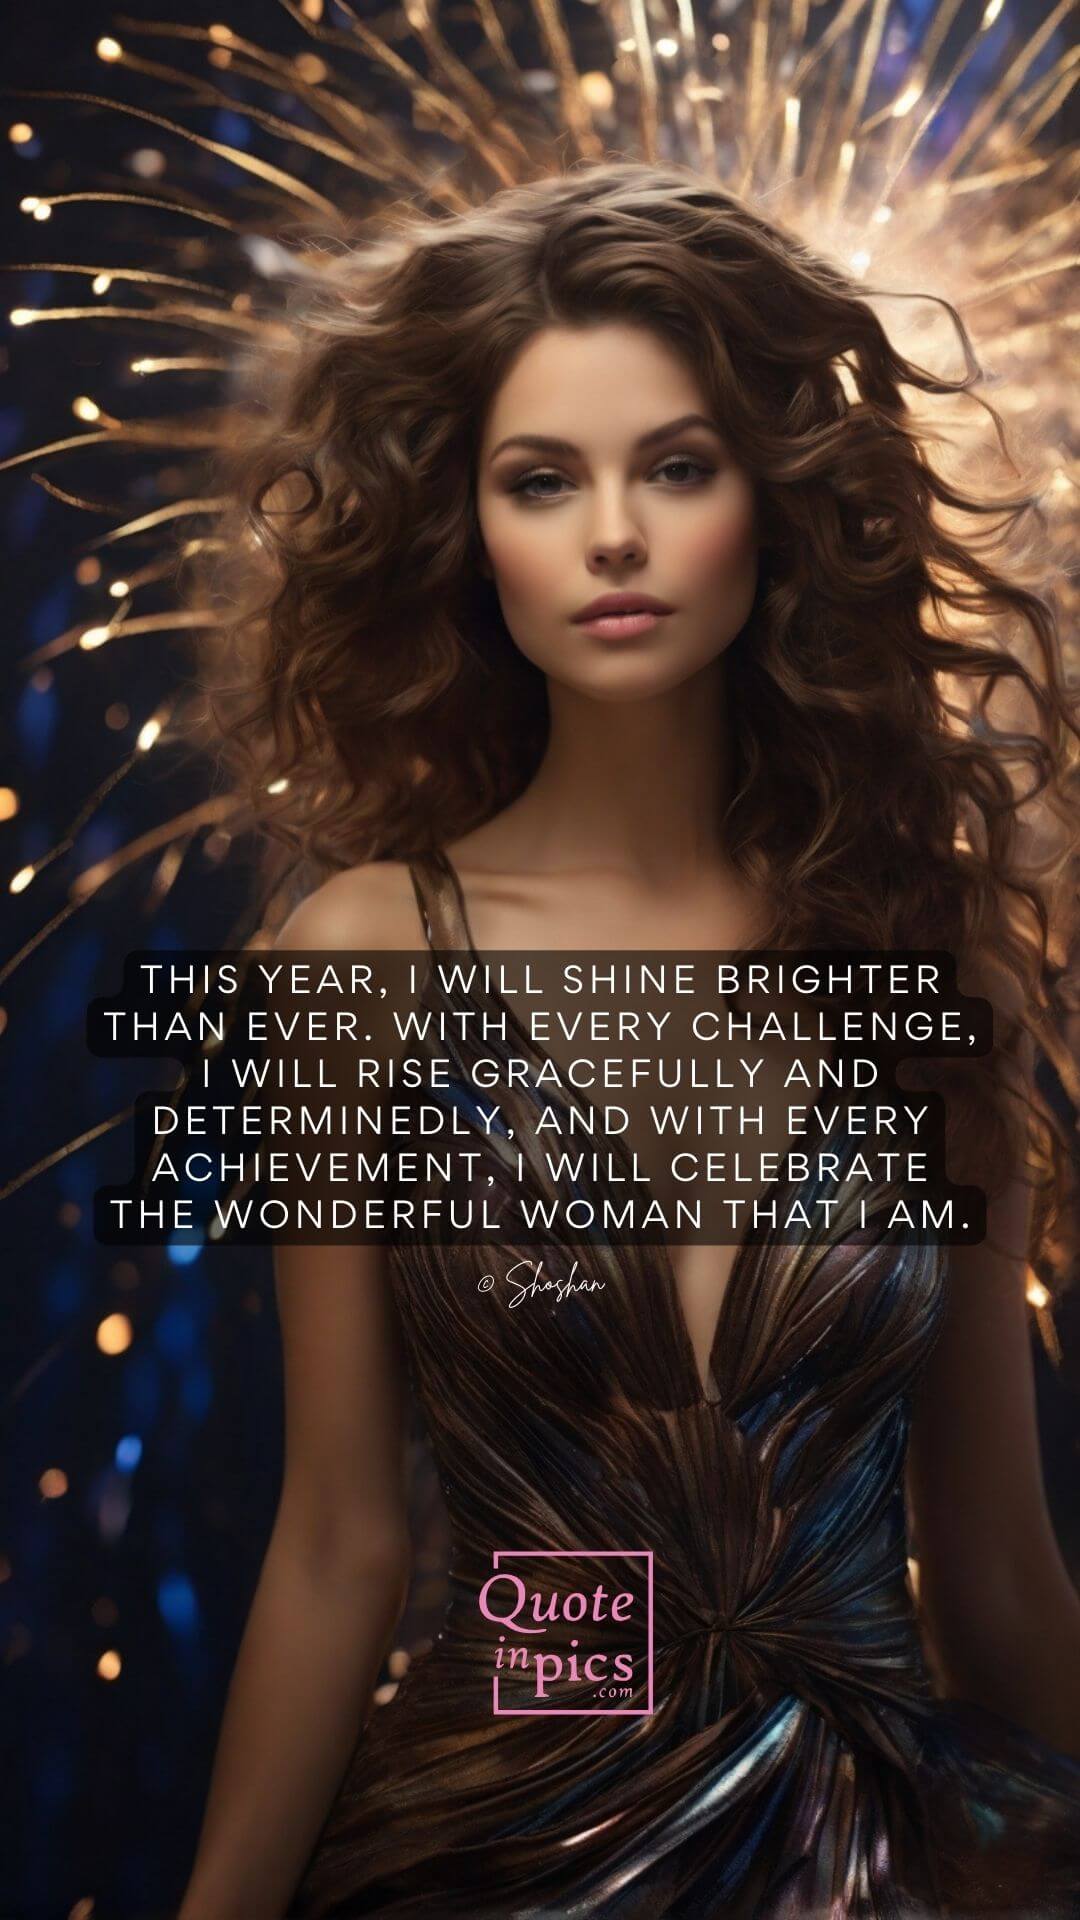 This year, I will shine brighter than ever